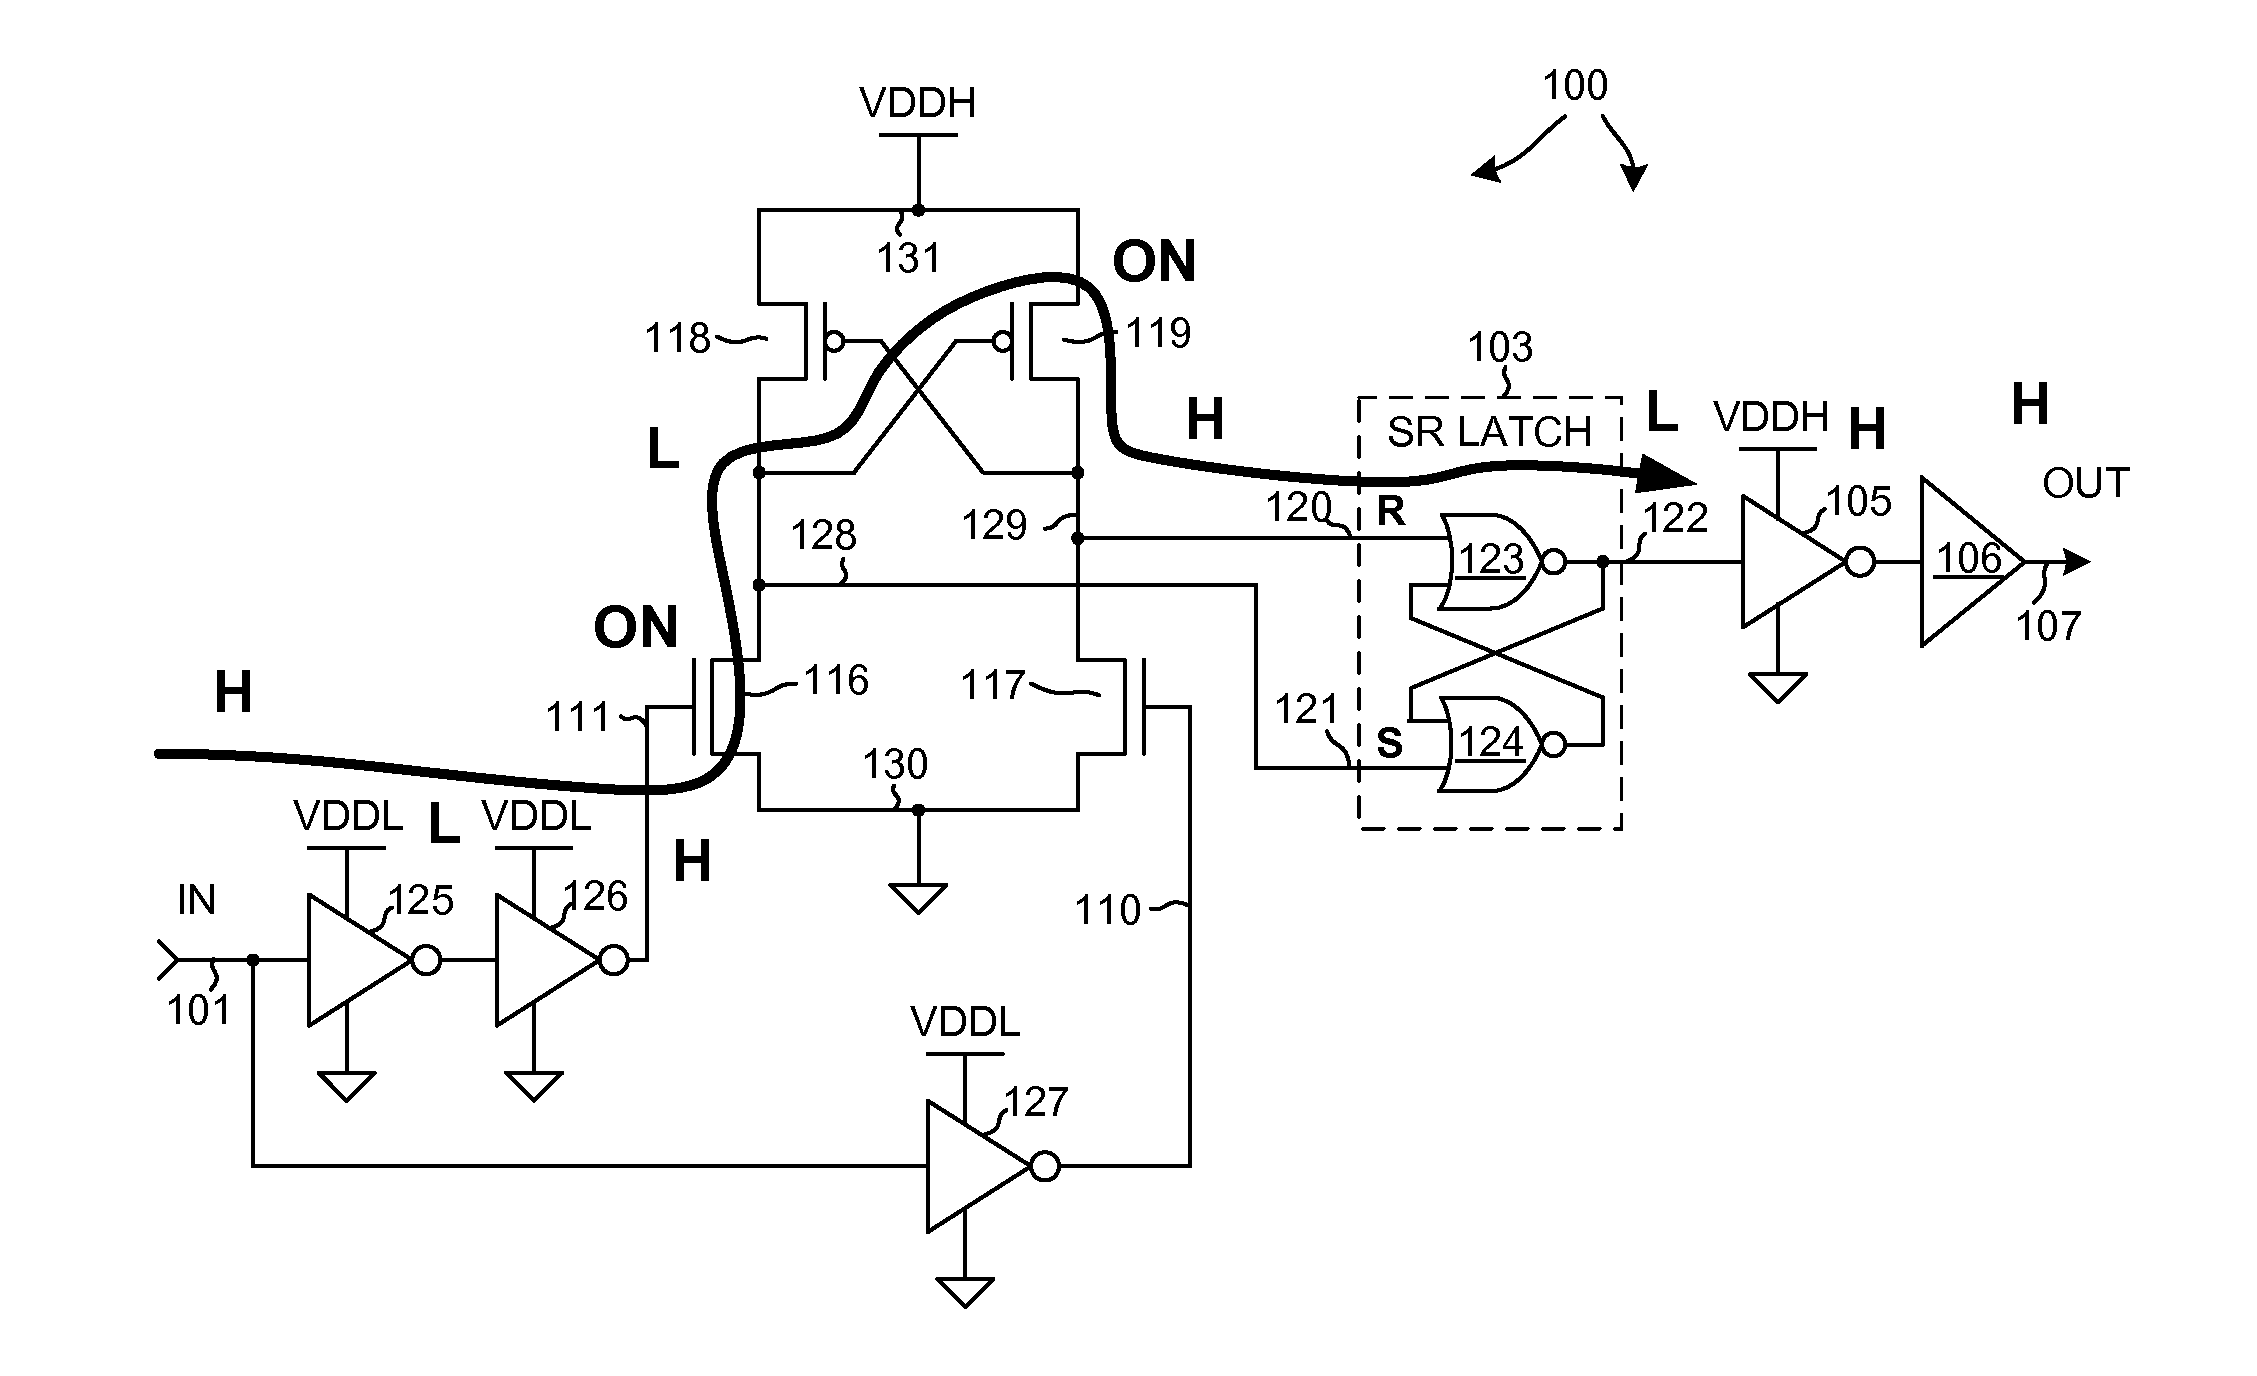 Level shifter having low duty cycle distortion